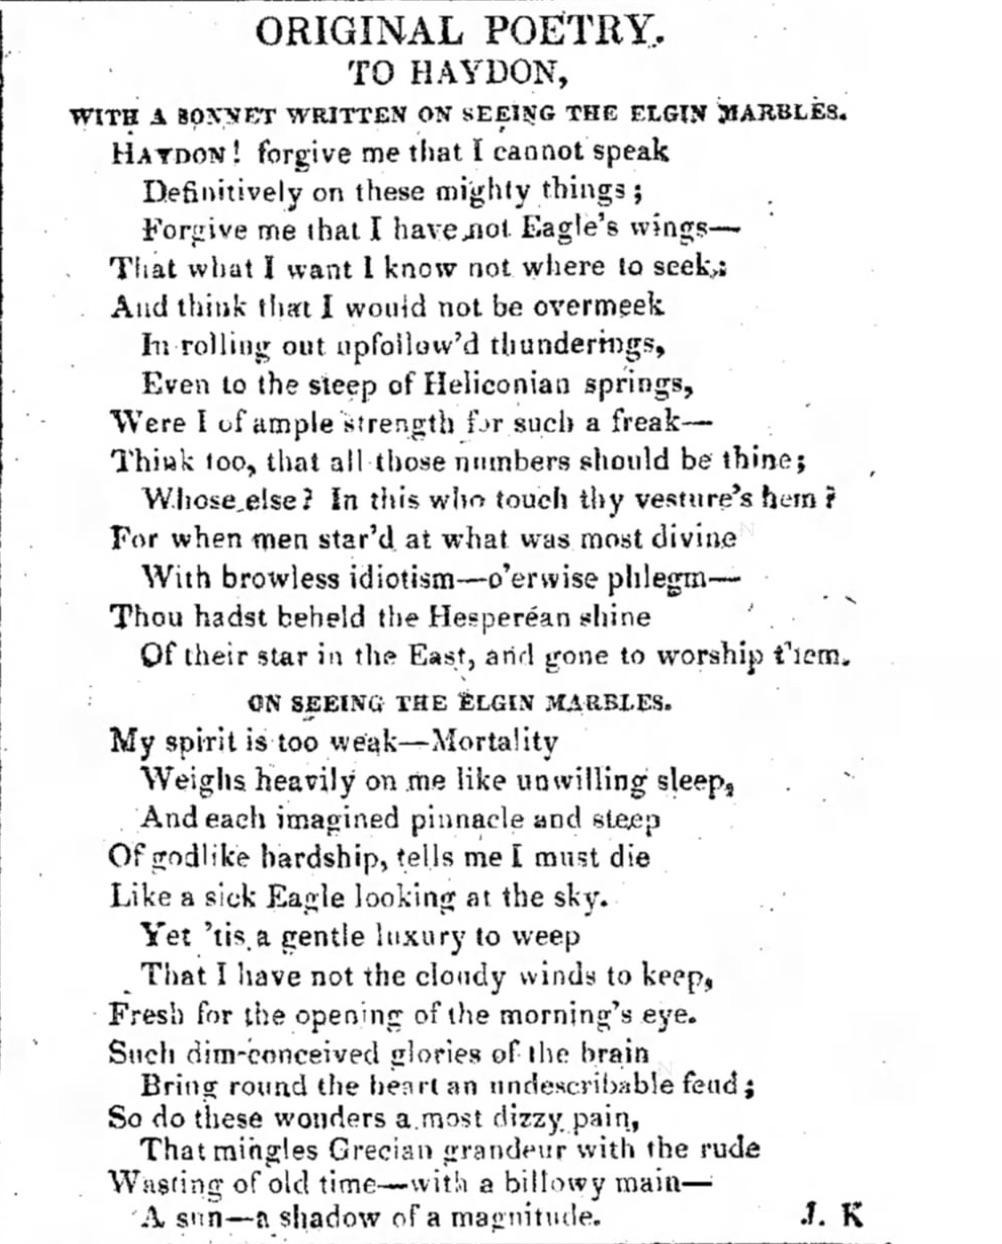 Publication of Keats’s Elgin Marble poems in The Examiner, 9 March 1817, p.155.